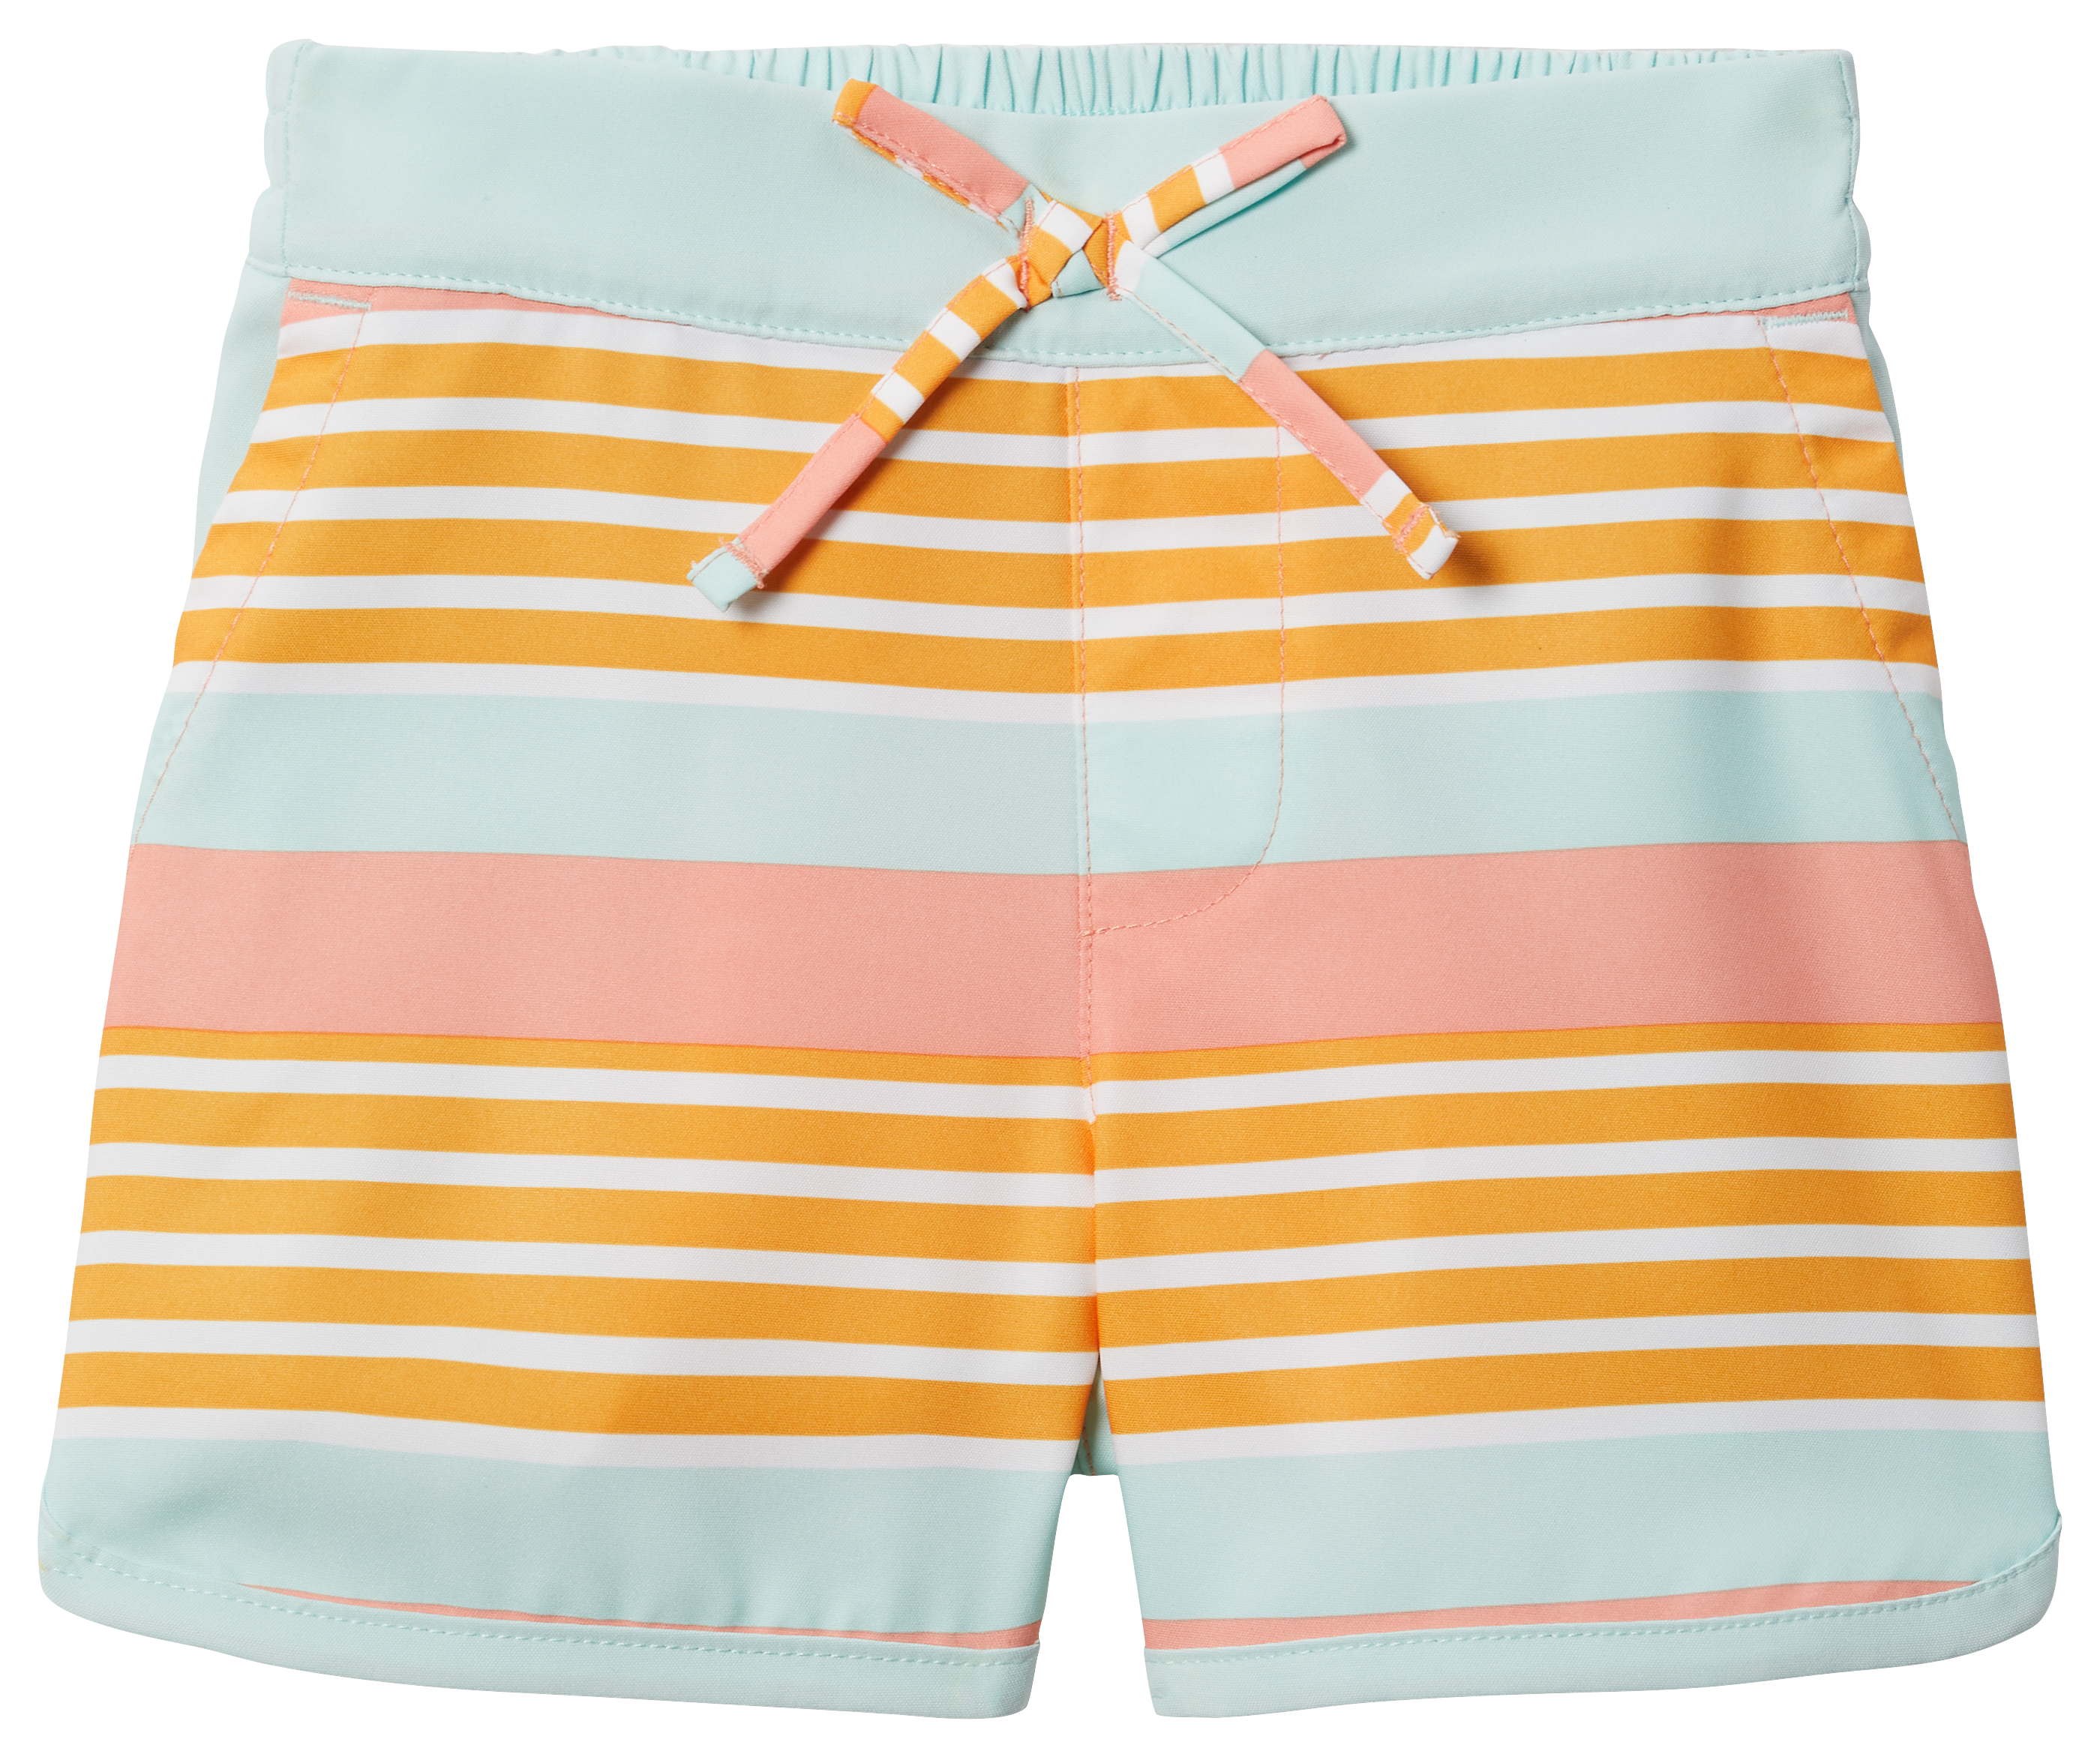 Pro for Shores Shops Bass Shorts Girls | Sandy Columbia Board Toddler Quick-Dry